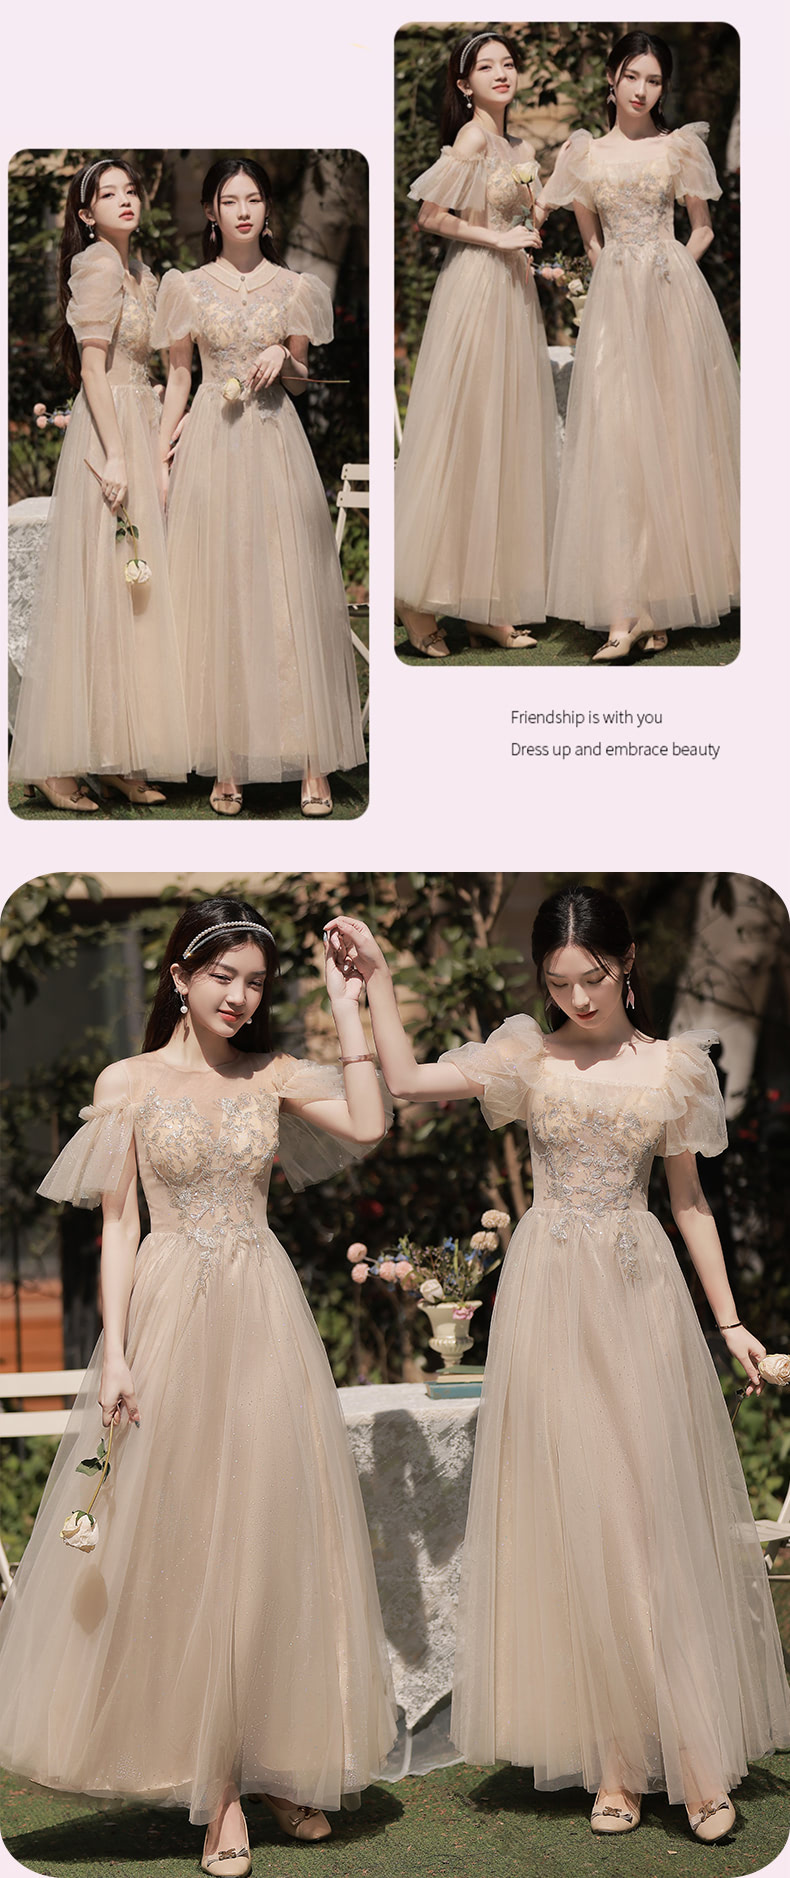 Formal-Apricot-Bridesmaid-Dress-Evening-Gown-for-Wedding-Party16.jpg